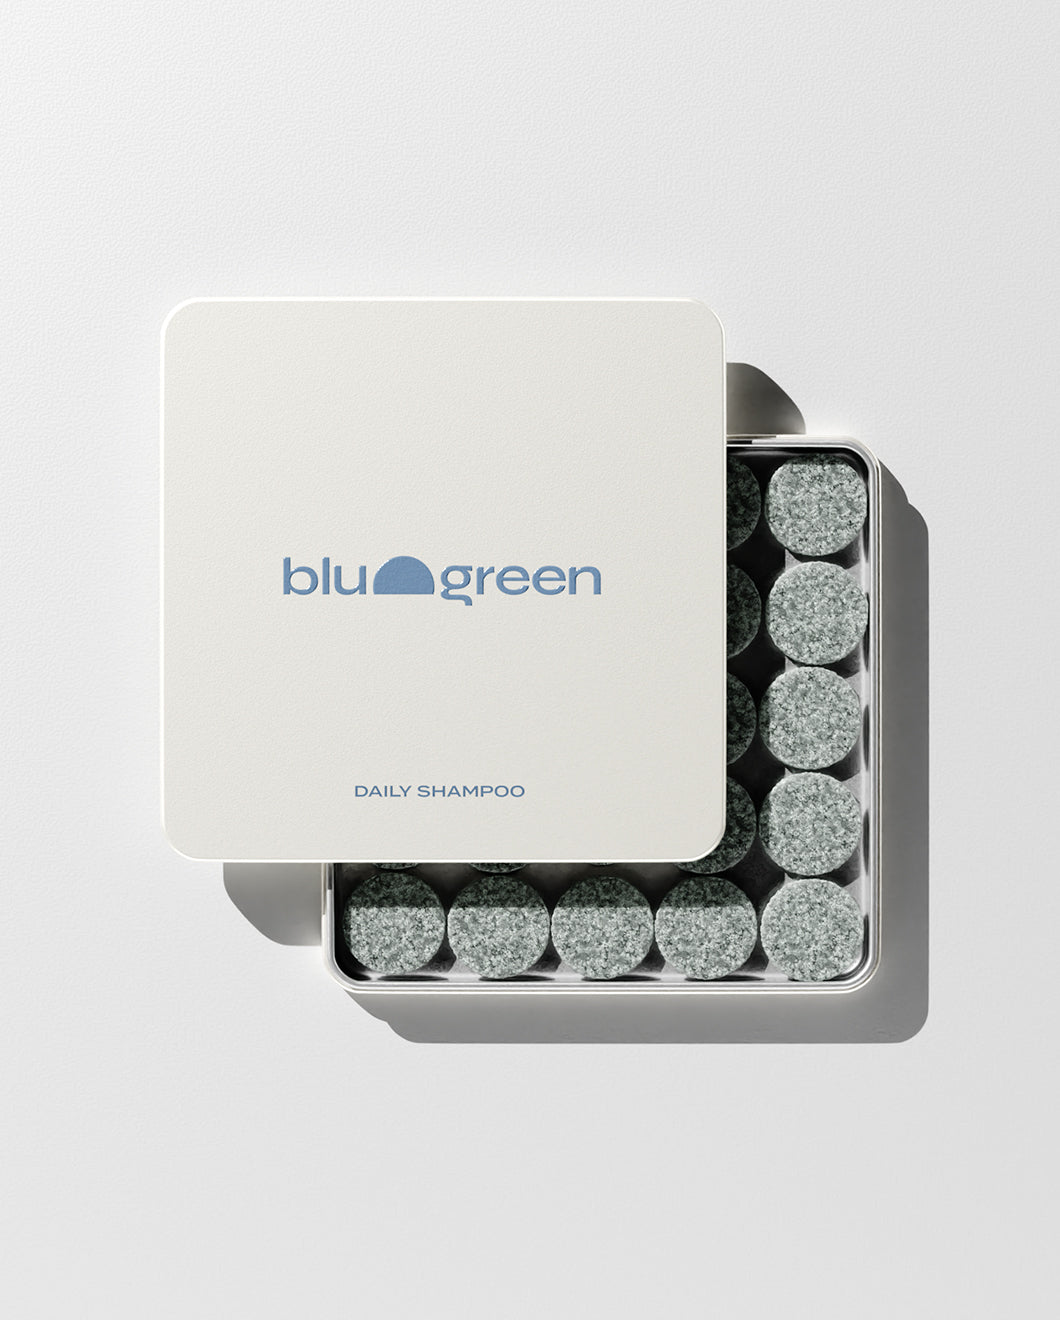 blu and green daily shampoo 50 muted green colored tablets in a flat square tin with blue logo. lid slightly off, studio, white ground, and strong light.